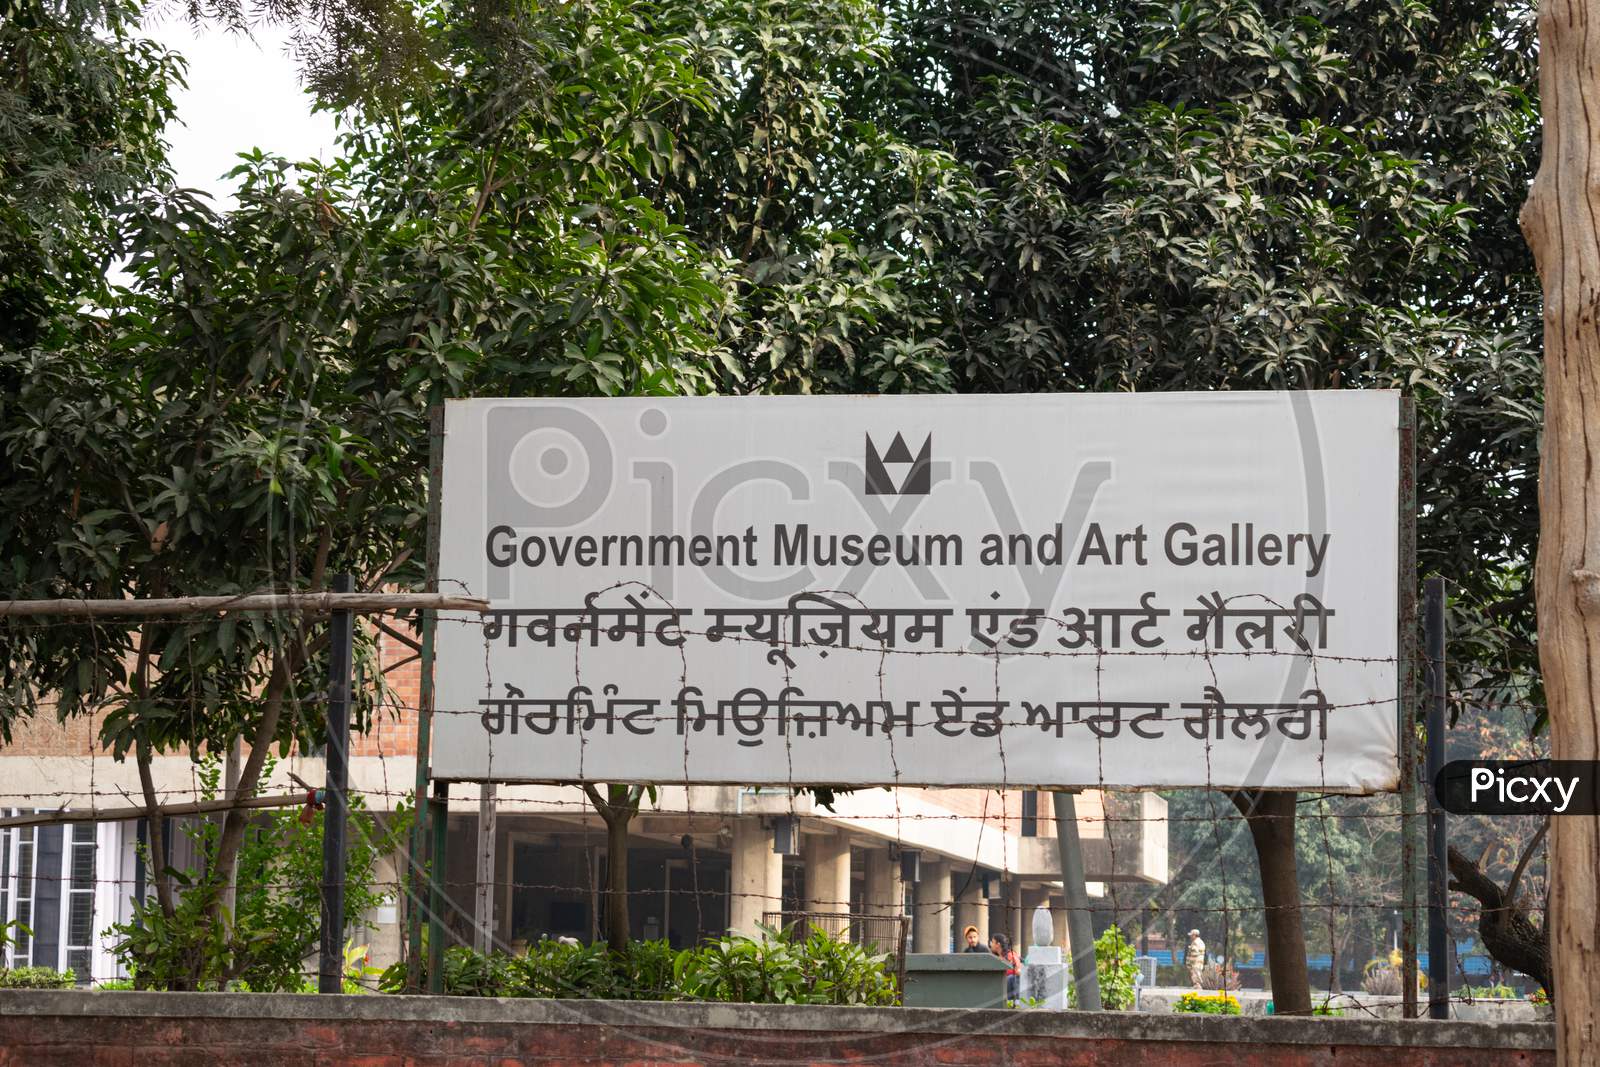 Government Museum and Art Gallery chandigarh